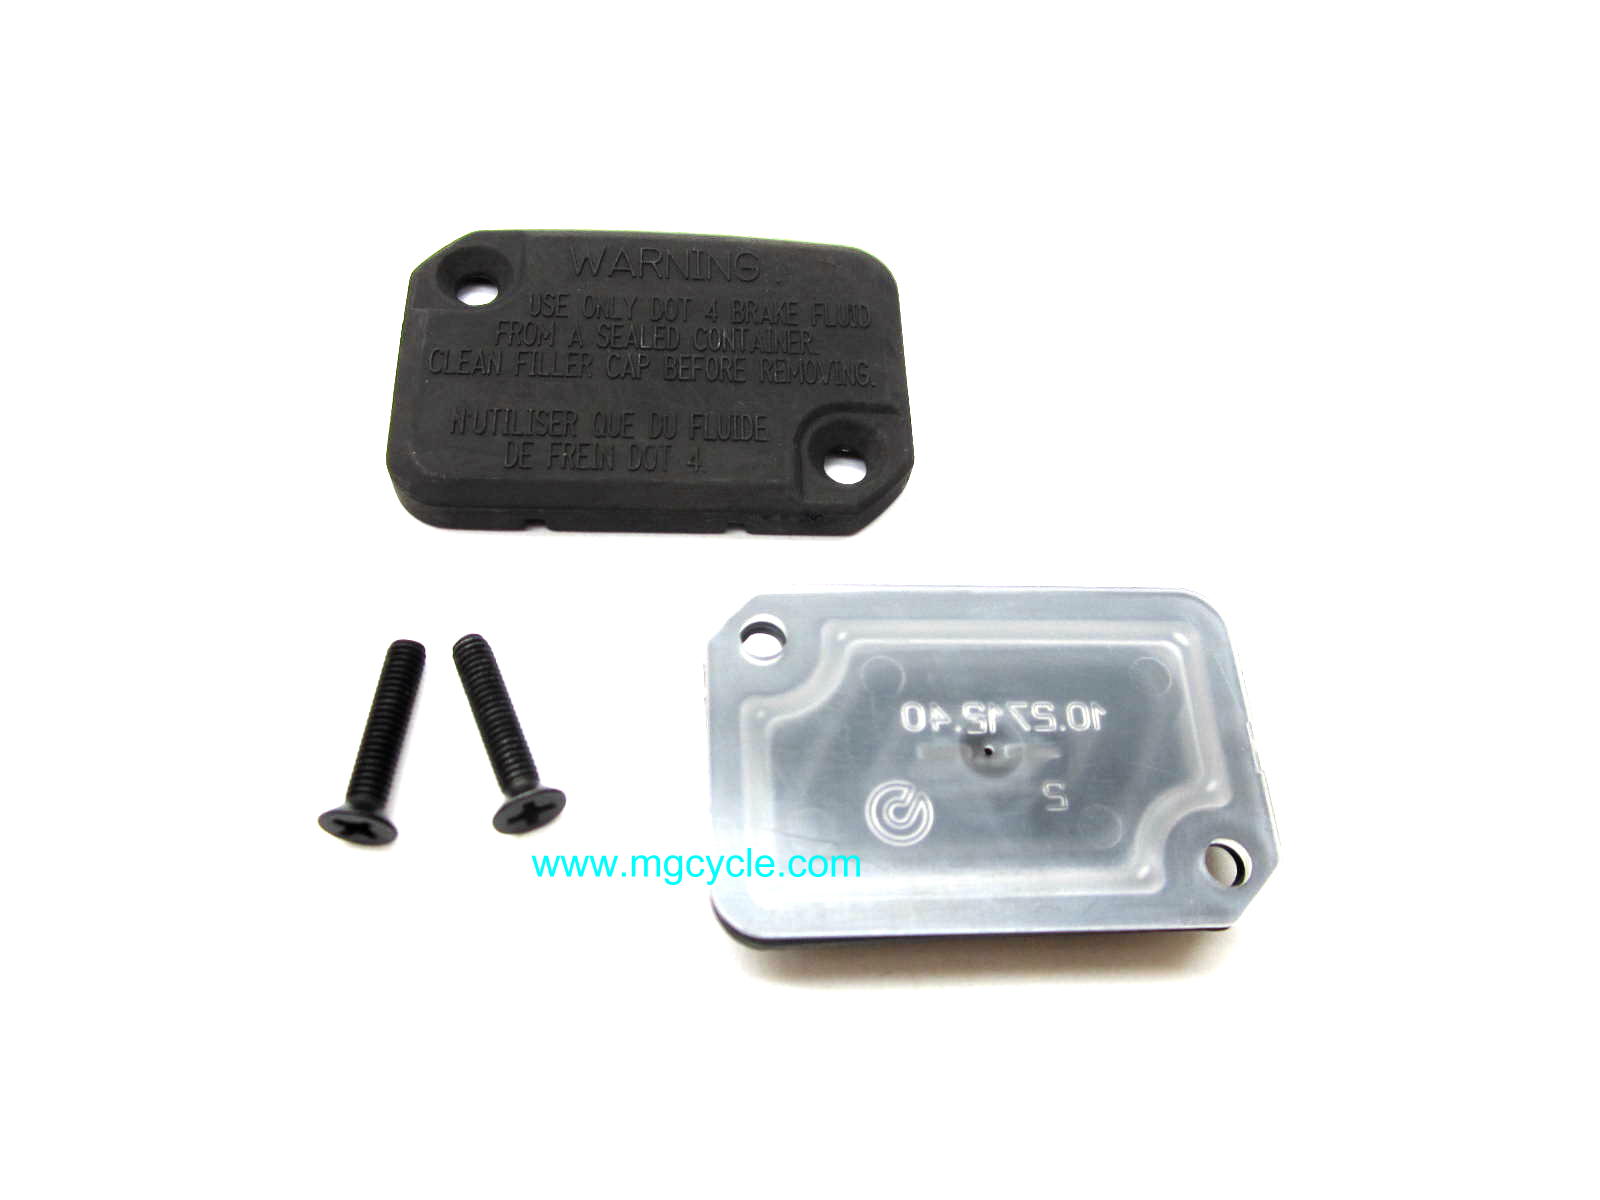 Brembo master cylinder lid kit for many 2001 and later models